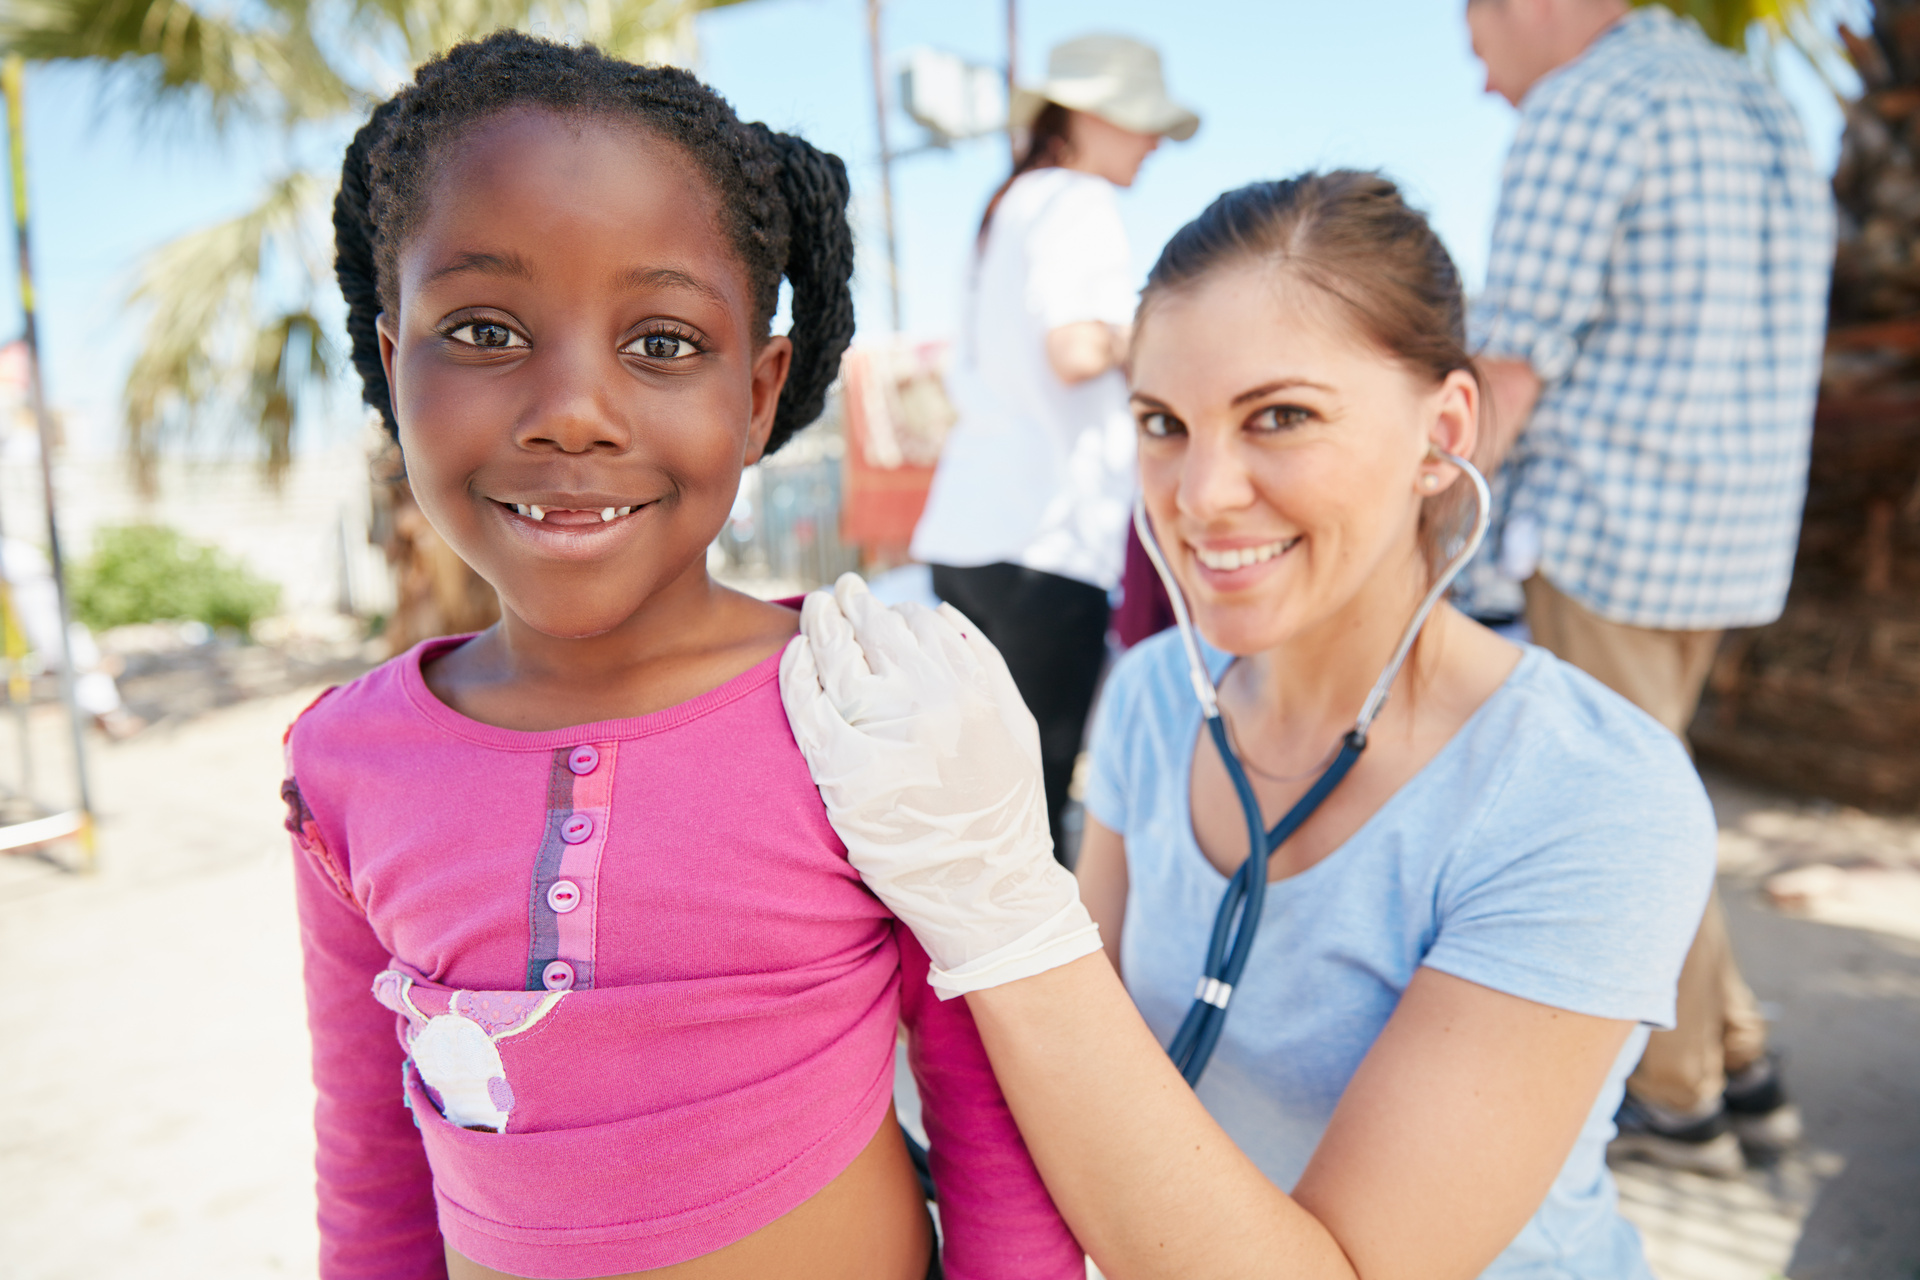 Young patient feeling better after seeing a nurse in a community health setting